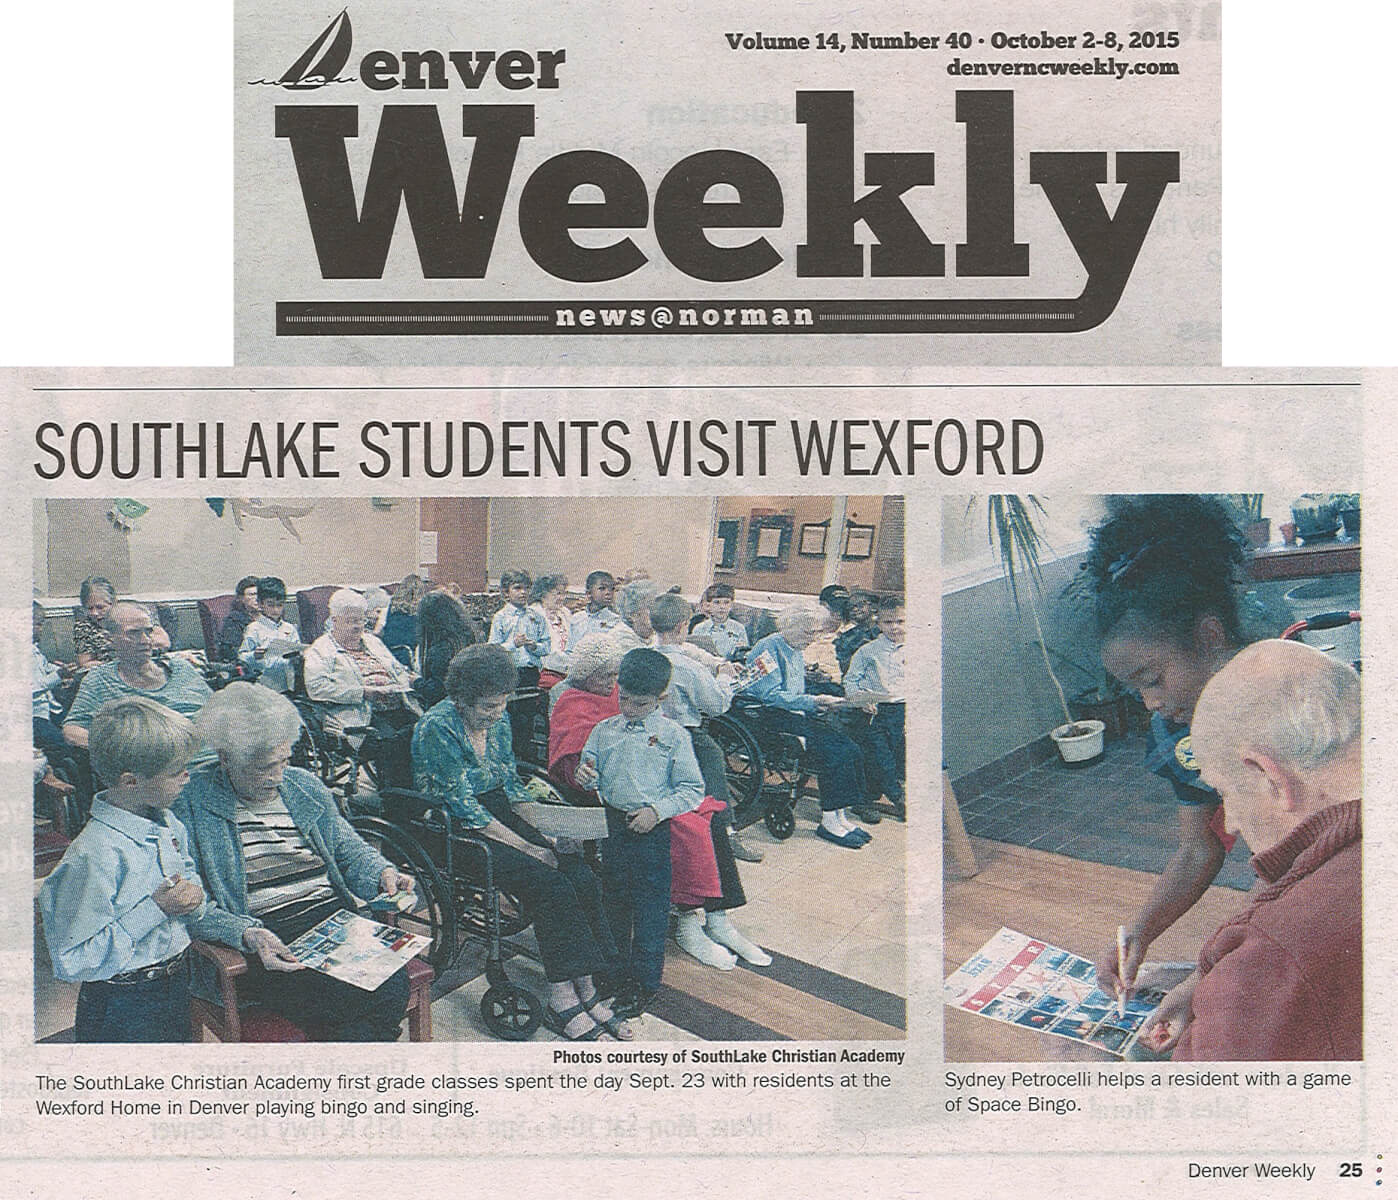 Wexford House get a visit from Southlake students photos in the Denver Weekly October 2-8, 2015